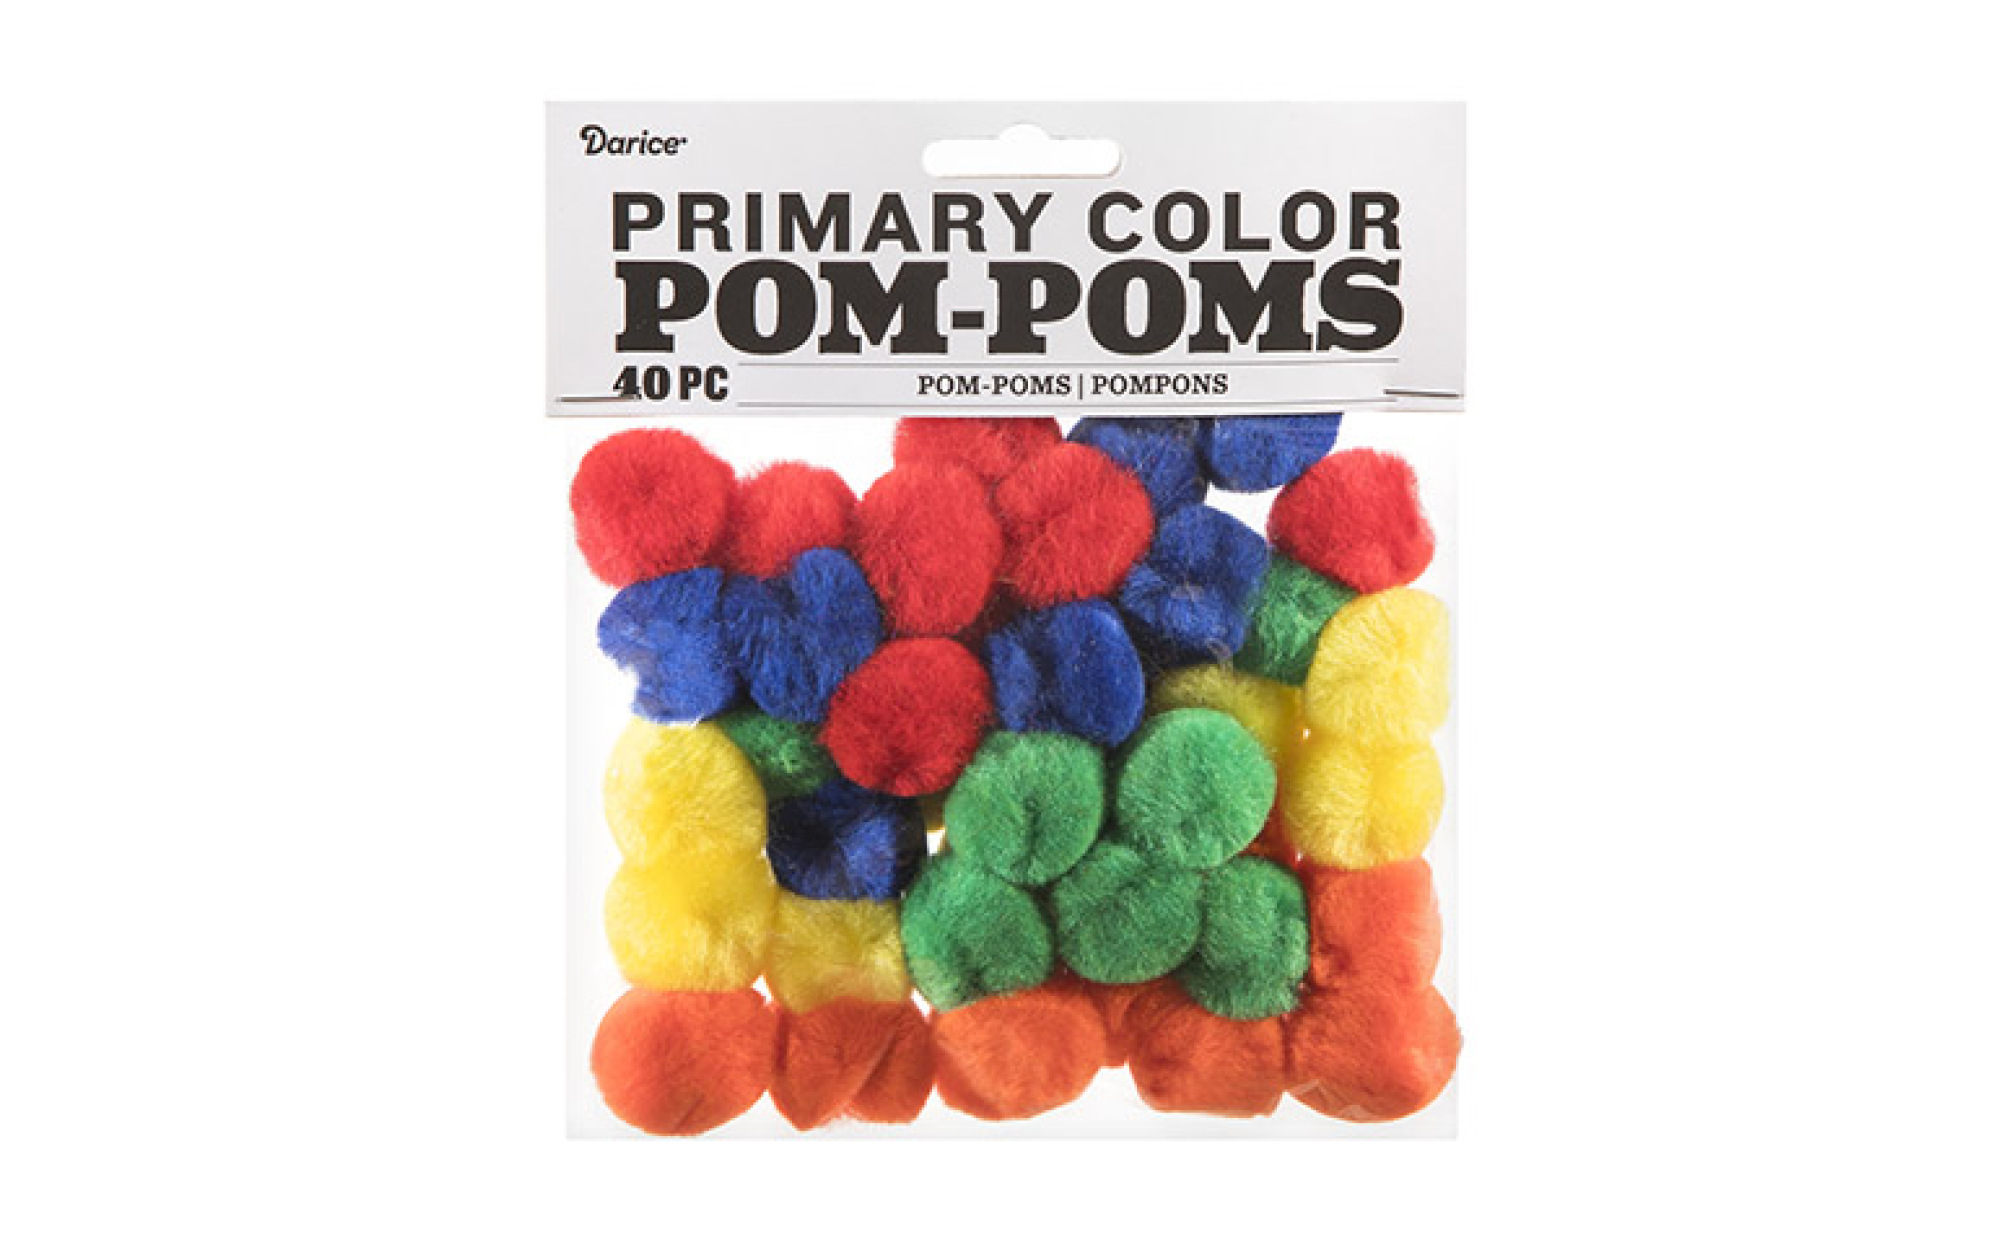 3/4 inch Mutlicolored Small Craft Pom Poms 100 Pieces